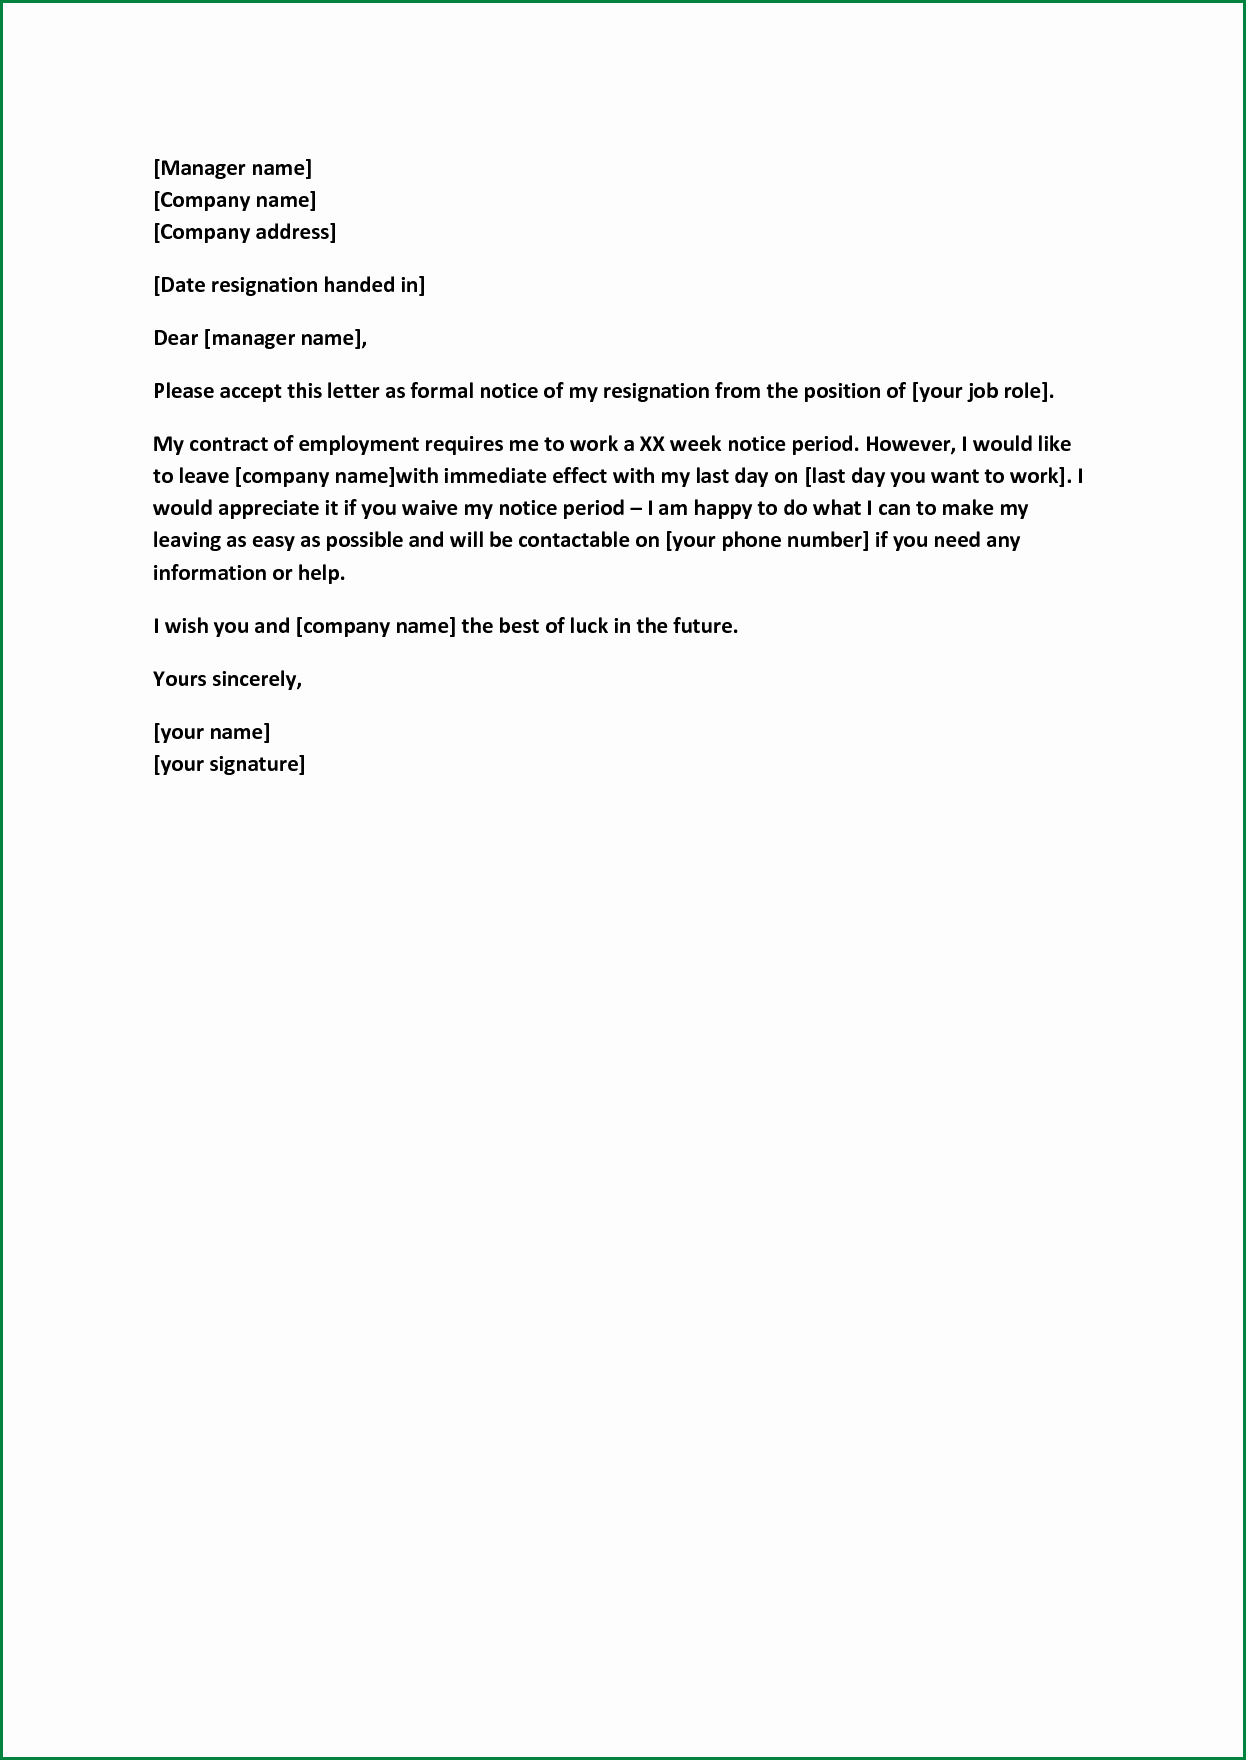 Formal Resignation Letter Sample with Notice Period